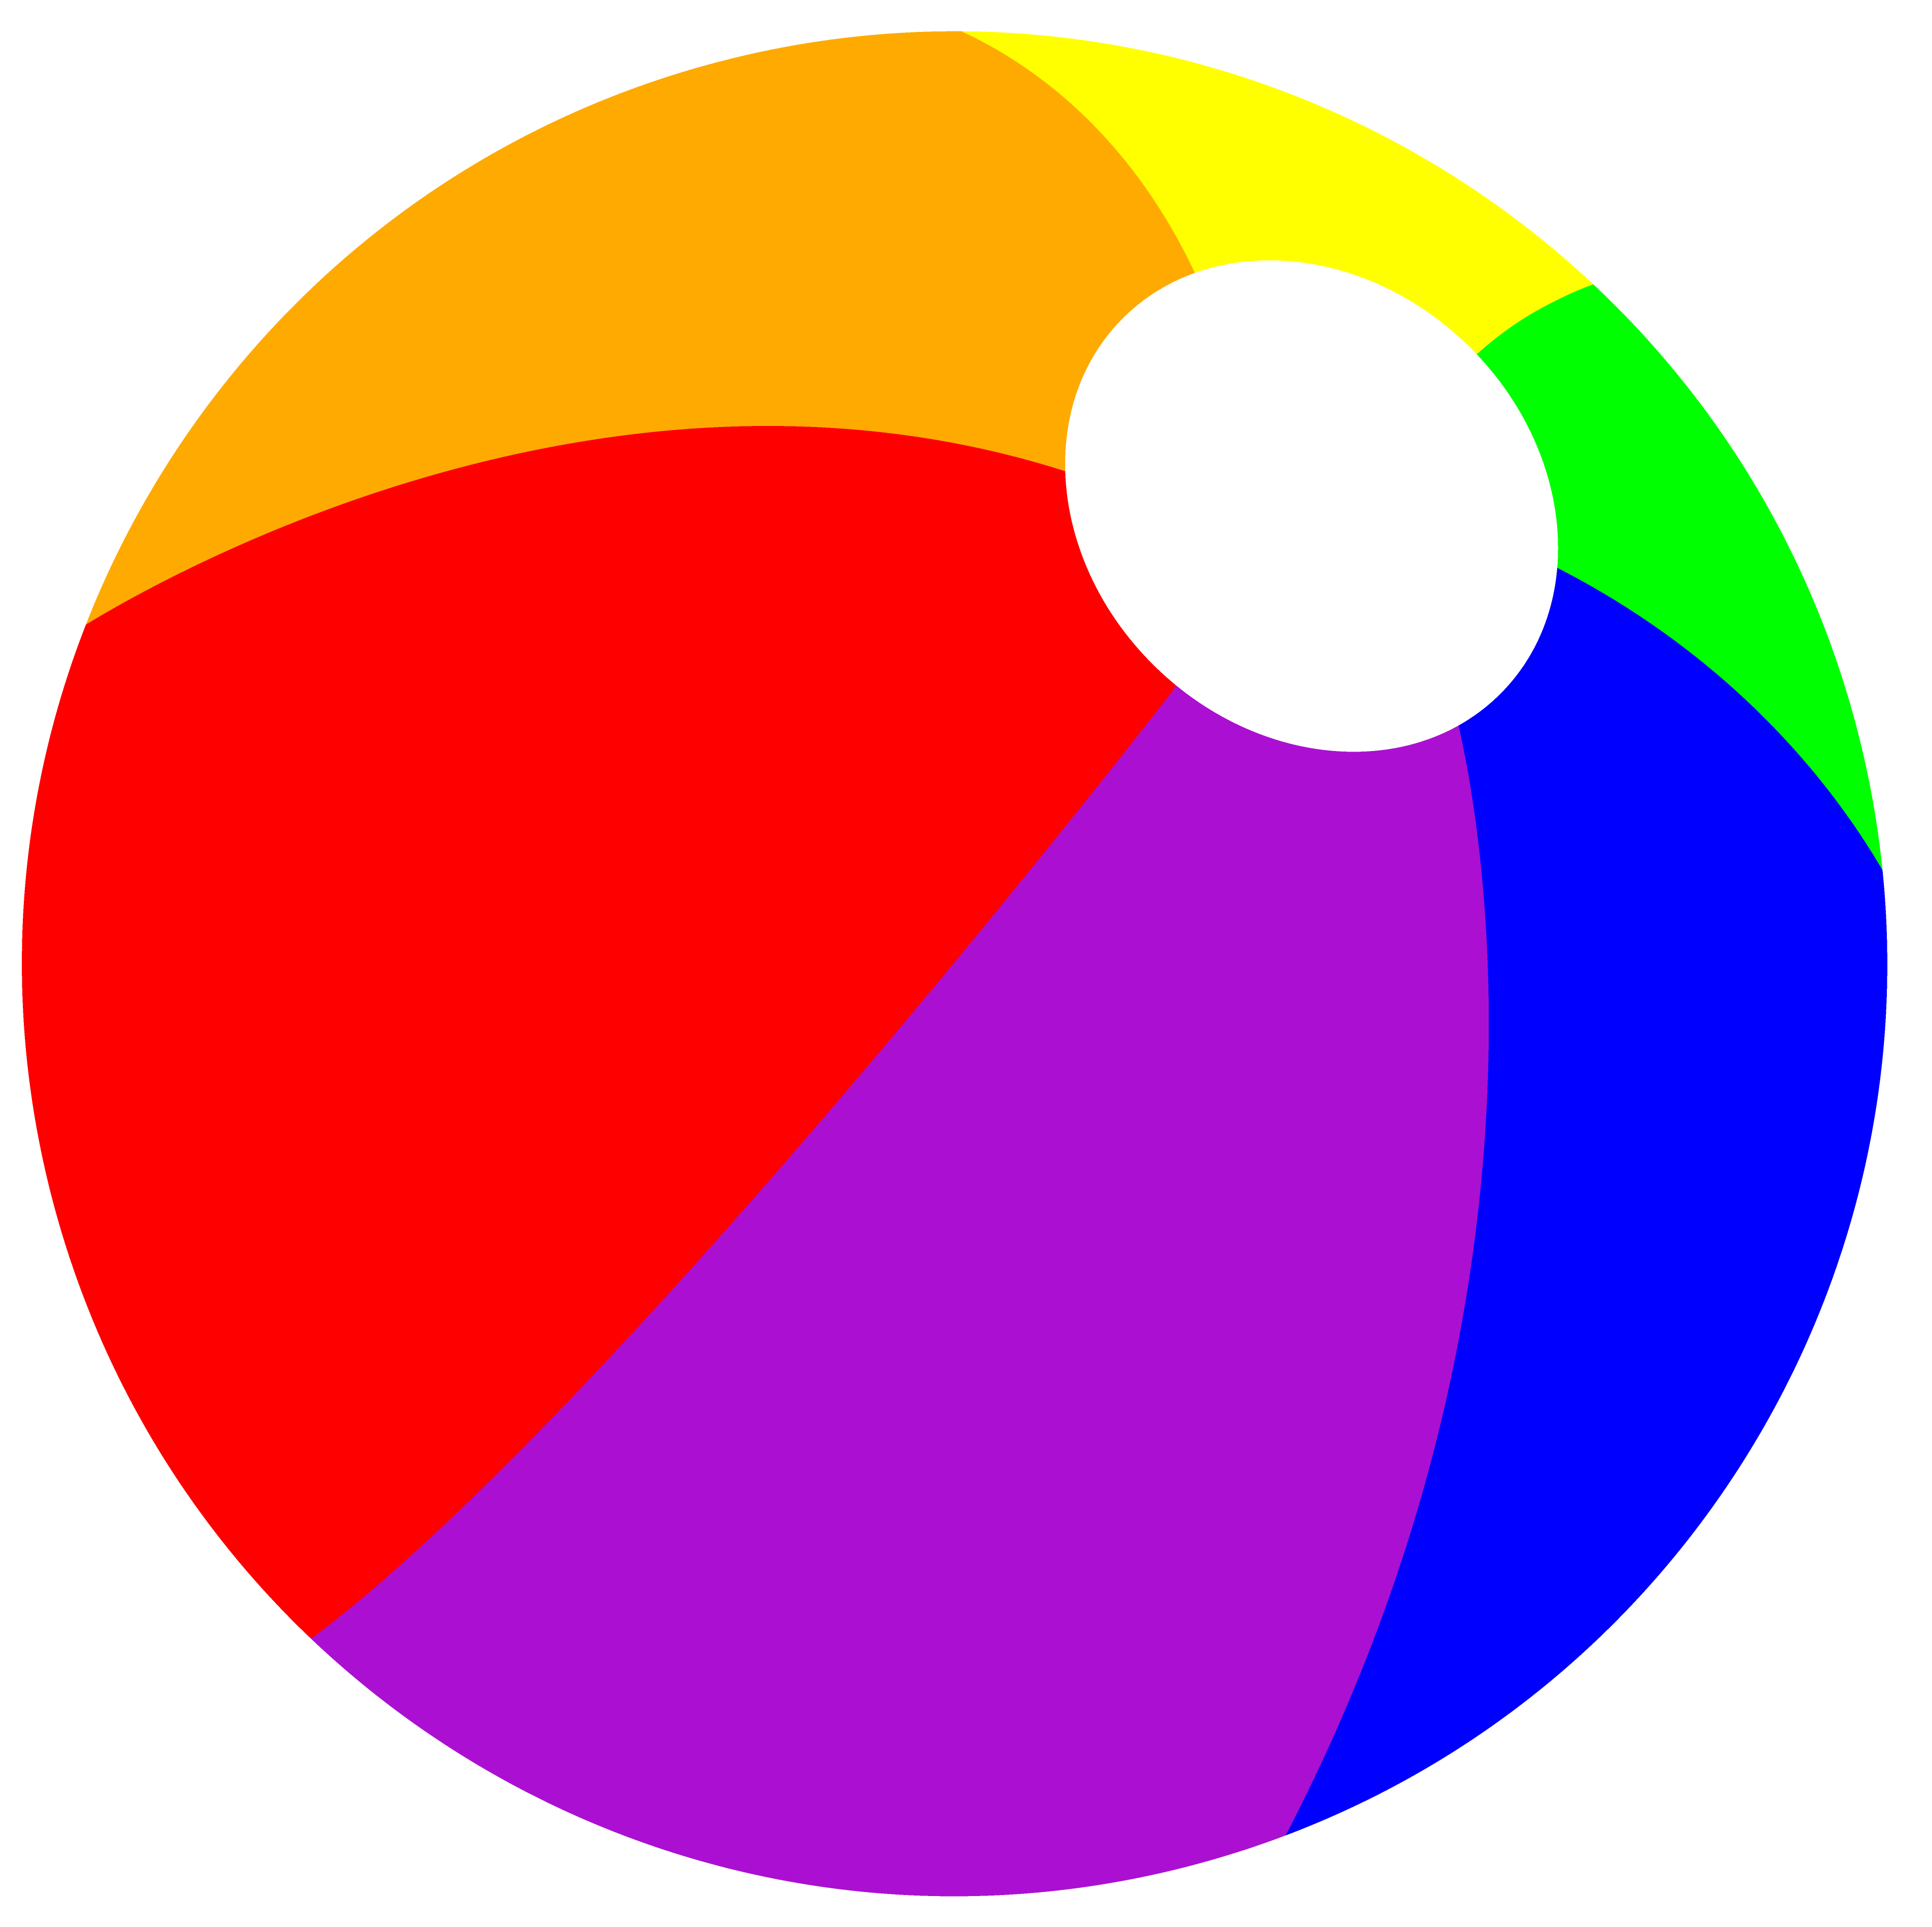 Related Beachball PNG Images.